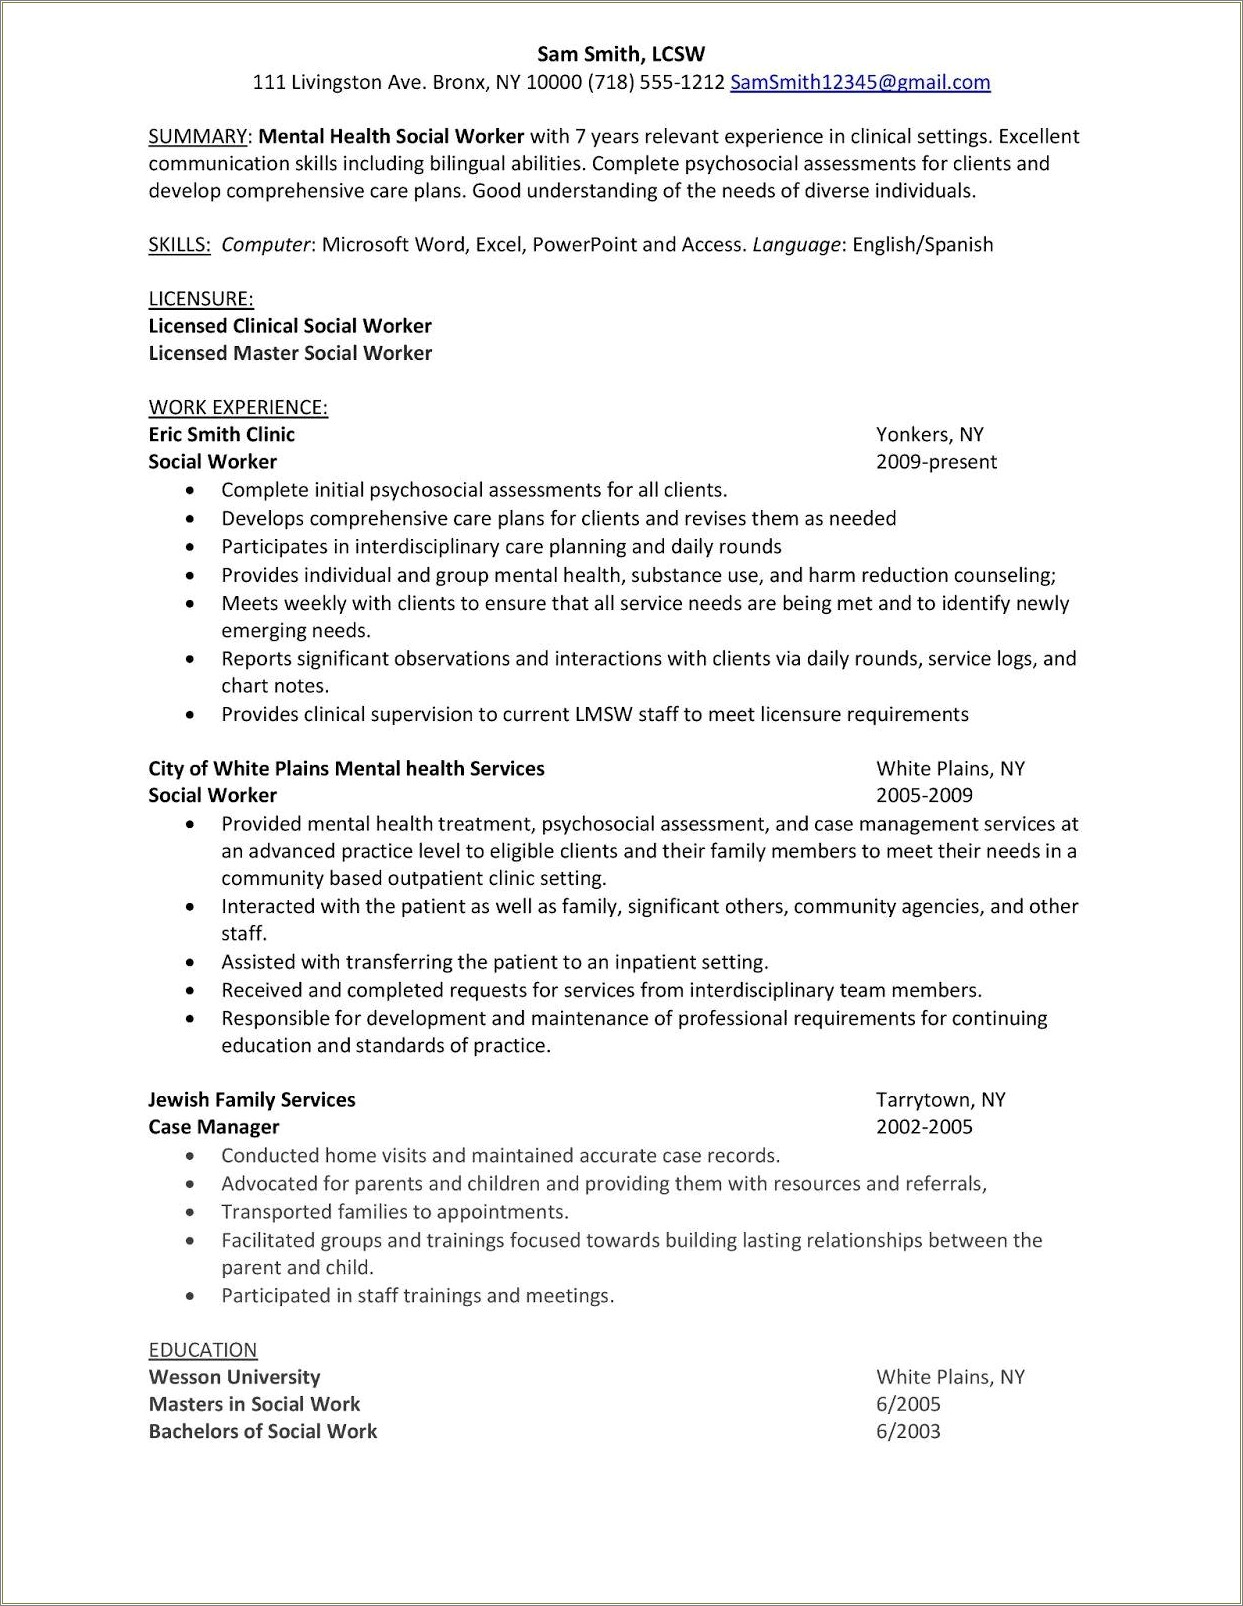 Resume And Cover Letter Services 6